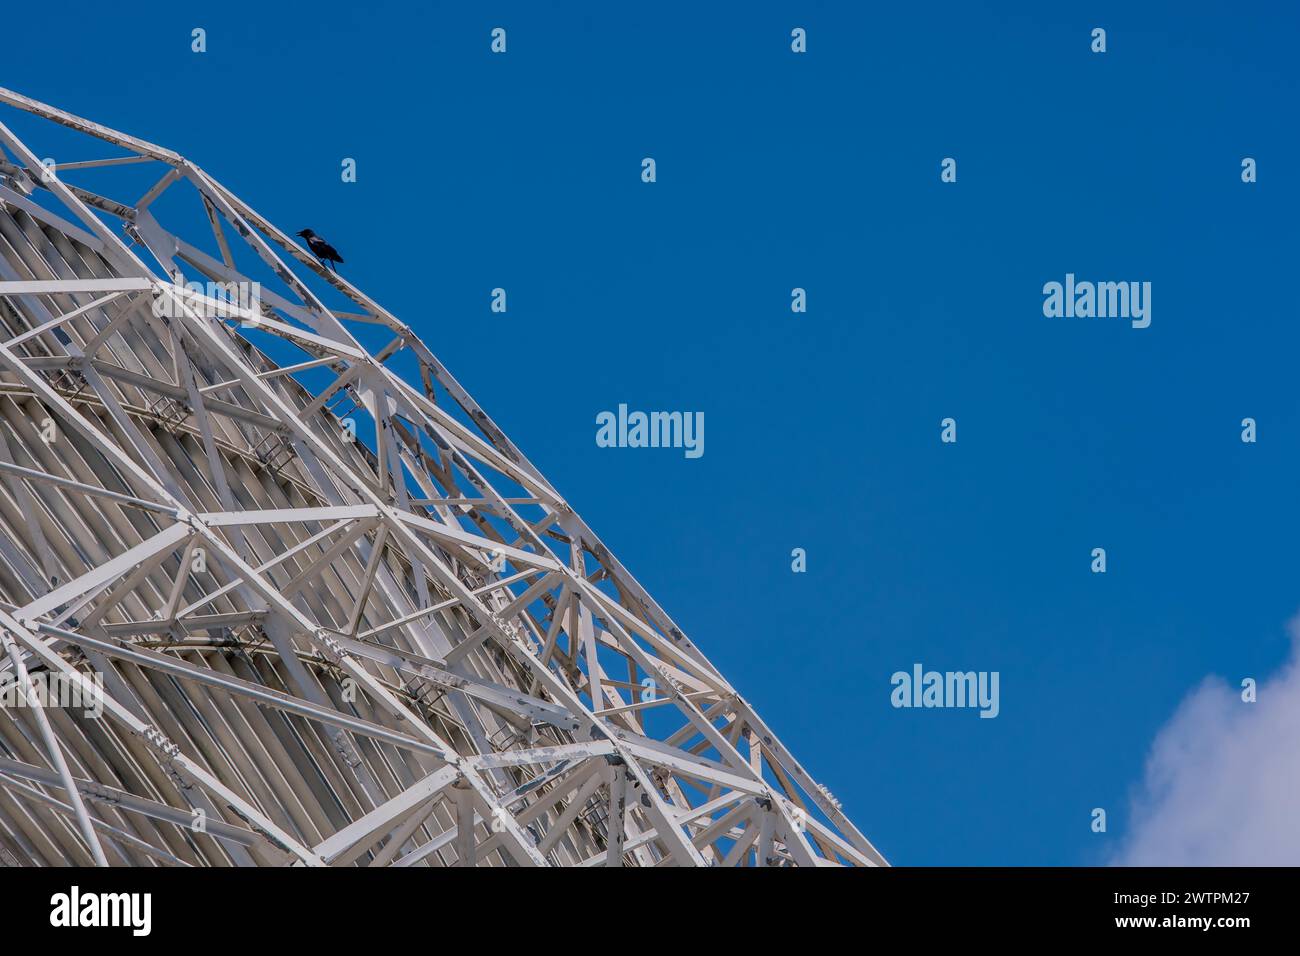 Metal structure against a blue sky, showcasing architectural construction, in South Korea Stock Photo